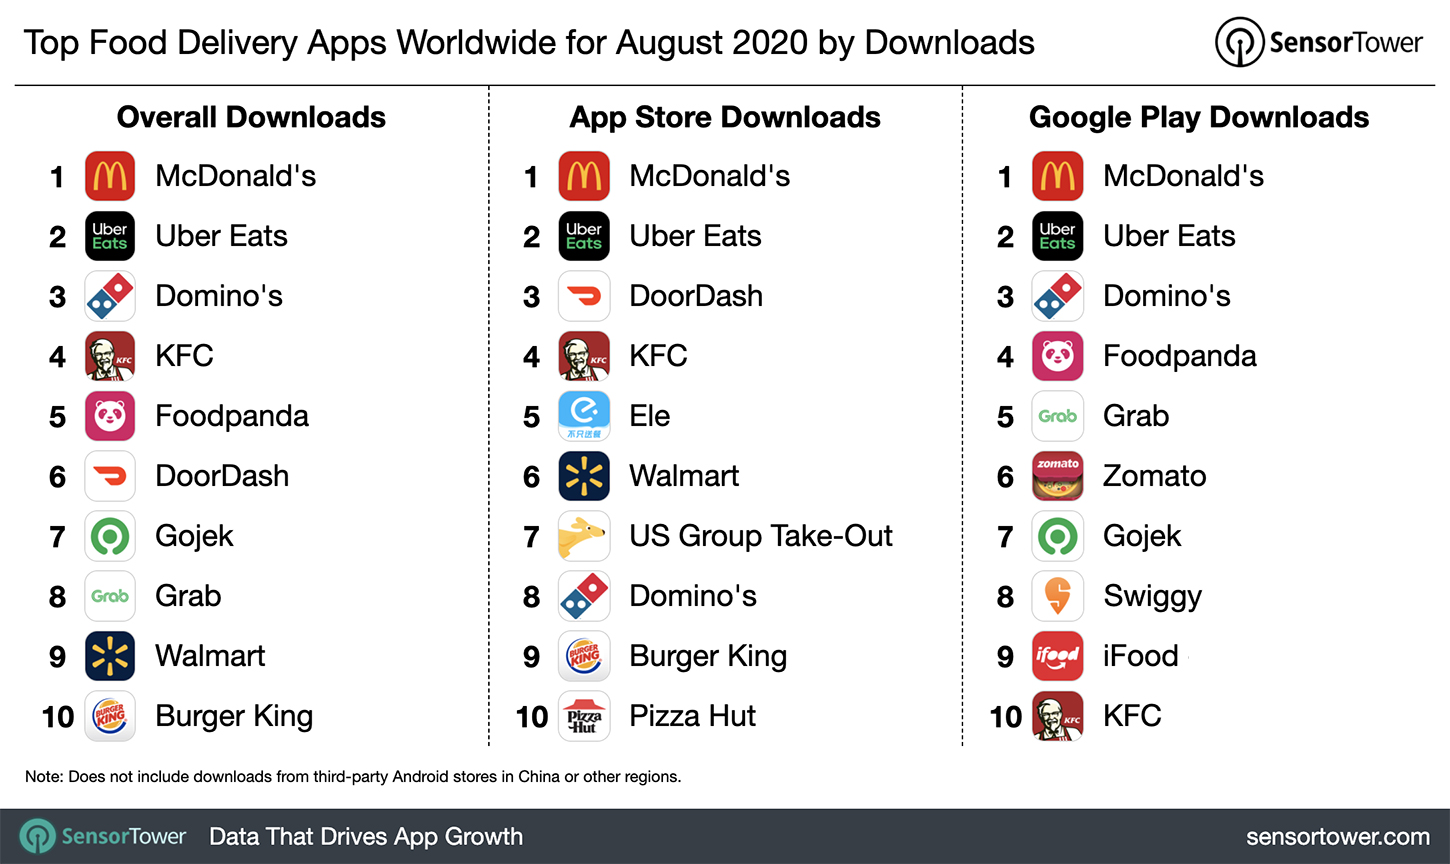 Top Food Delivery Apps Worldwide for August 2020 by Downloads